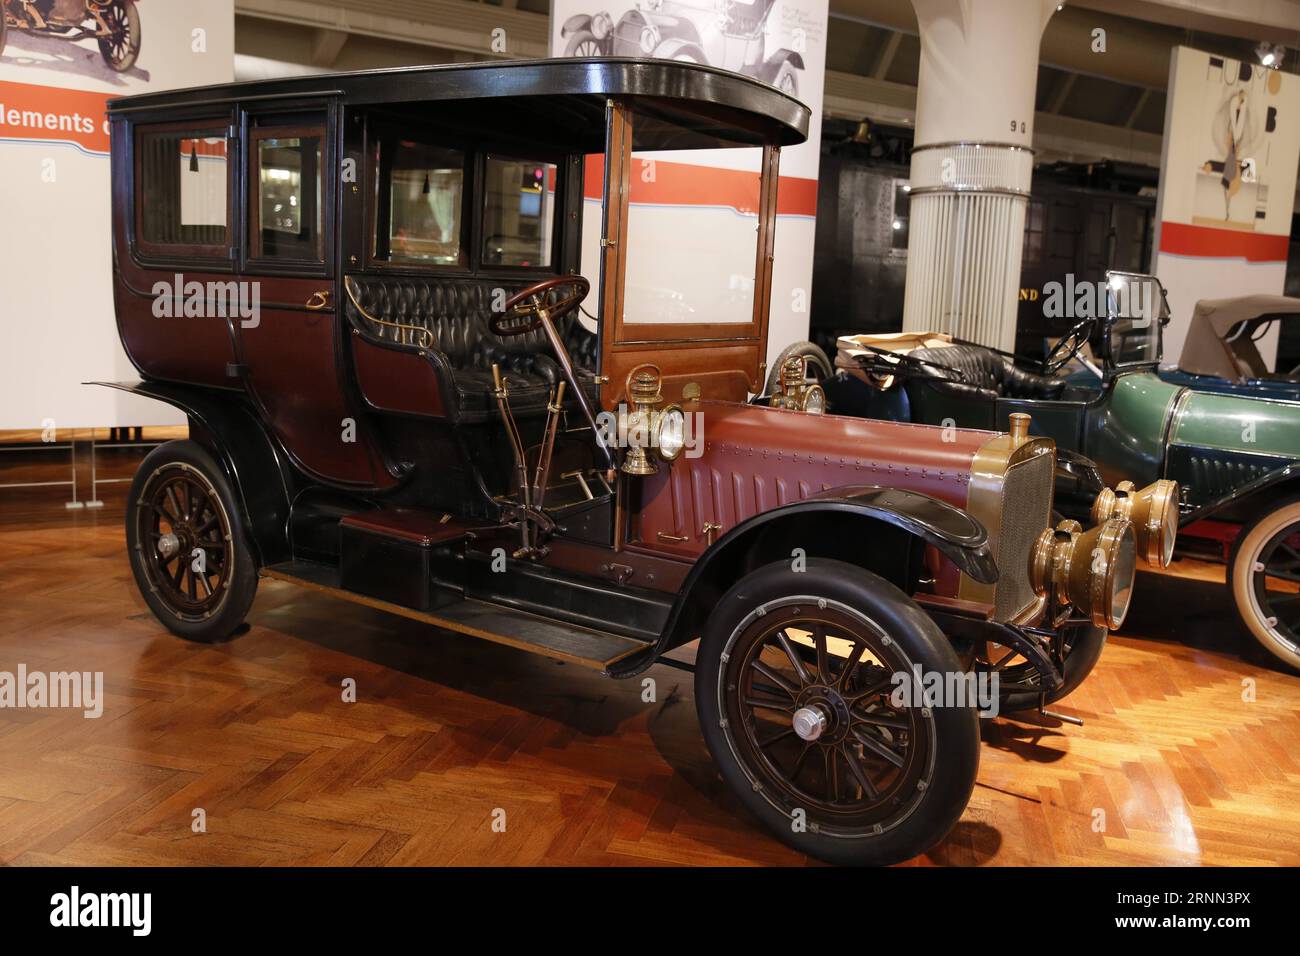 (170623) -- DETROIT, June 23, 2017 -- Photo taken on June 22, 2017 shows a vintage car displayed at the Henry Ford Museum of American Innovation, in Detroit, the United States. Wang Ping) (dtf) U.S.-DETROIT-HENRY FORD MUSEUM wangping PUBLICATIONxNOTxINxCHN   Detroit June 23 2017 Photo Taken ON June 22 2017 Shows a Vintage Car displayed AT The Henry Ford Museum of American Innovation in Detroit The United States Wang Ping dtf U S Detroit Henry Ford Museum Wangping PUBLICATIONxNOTxINxCHN Stock Photo